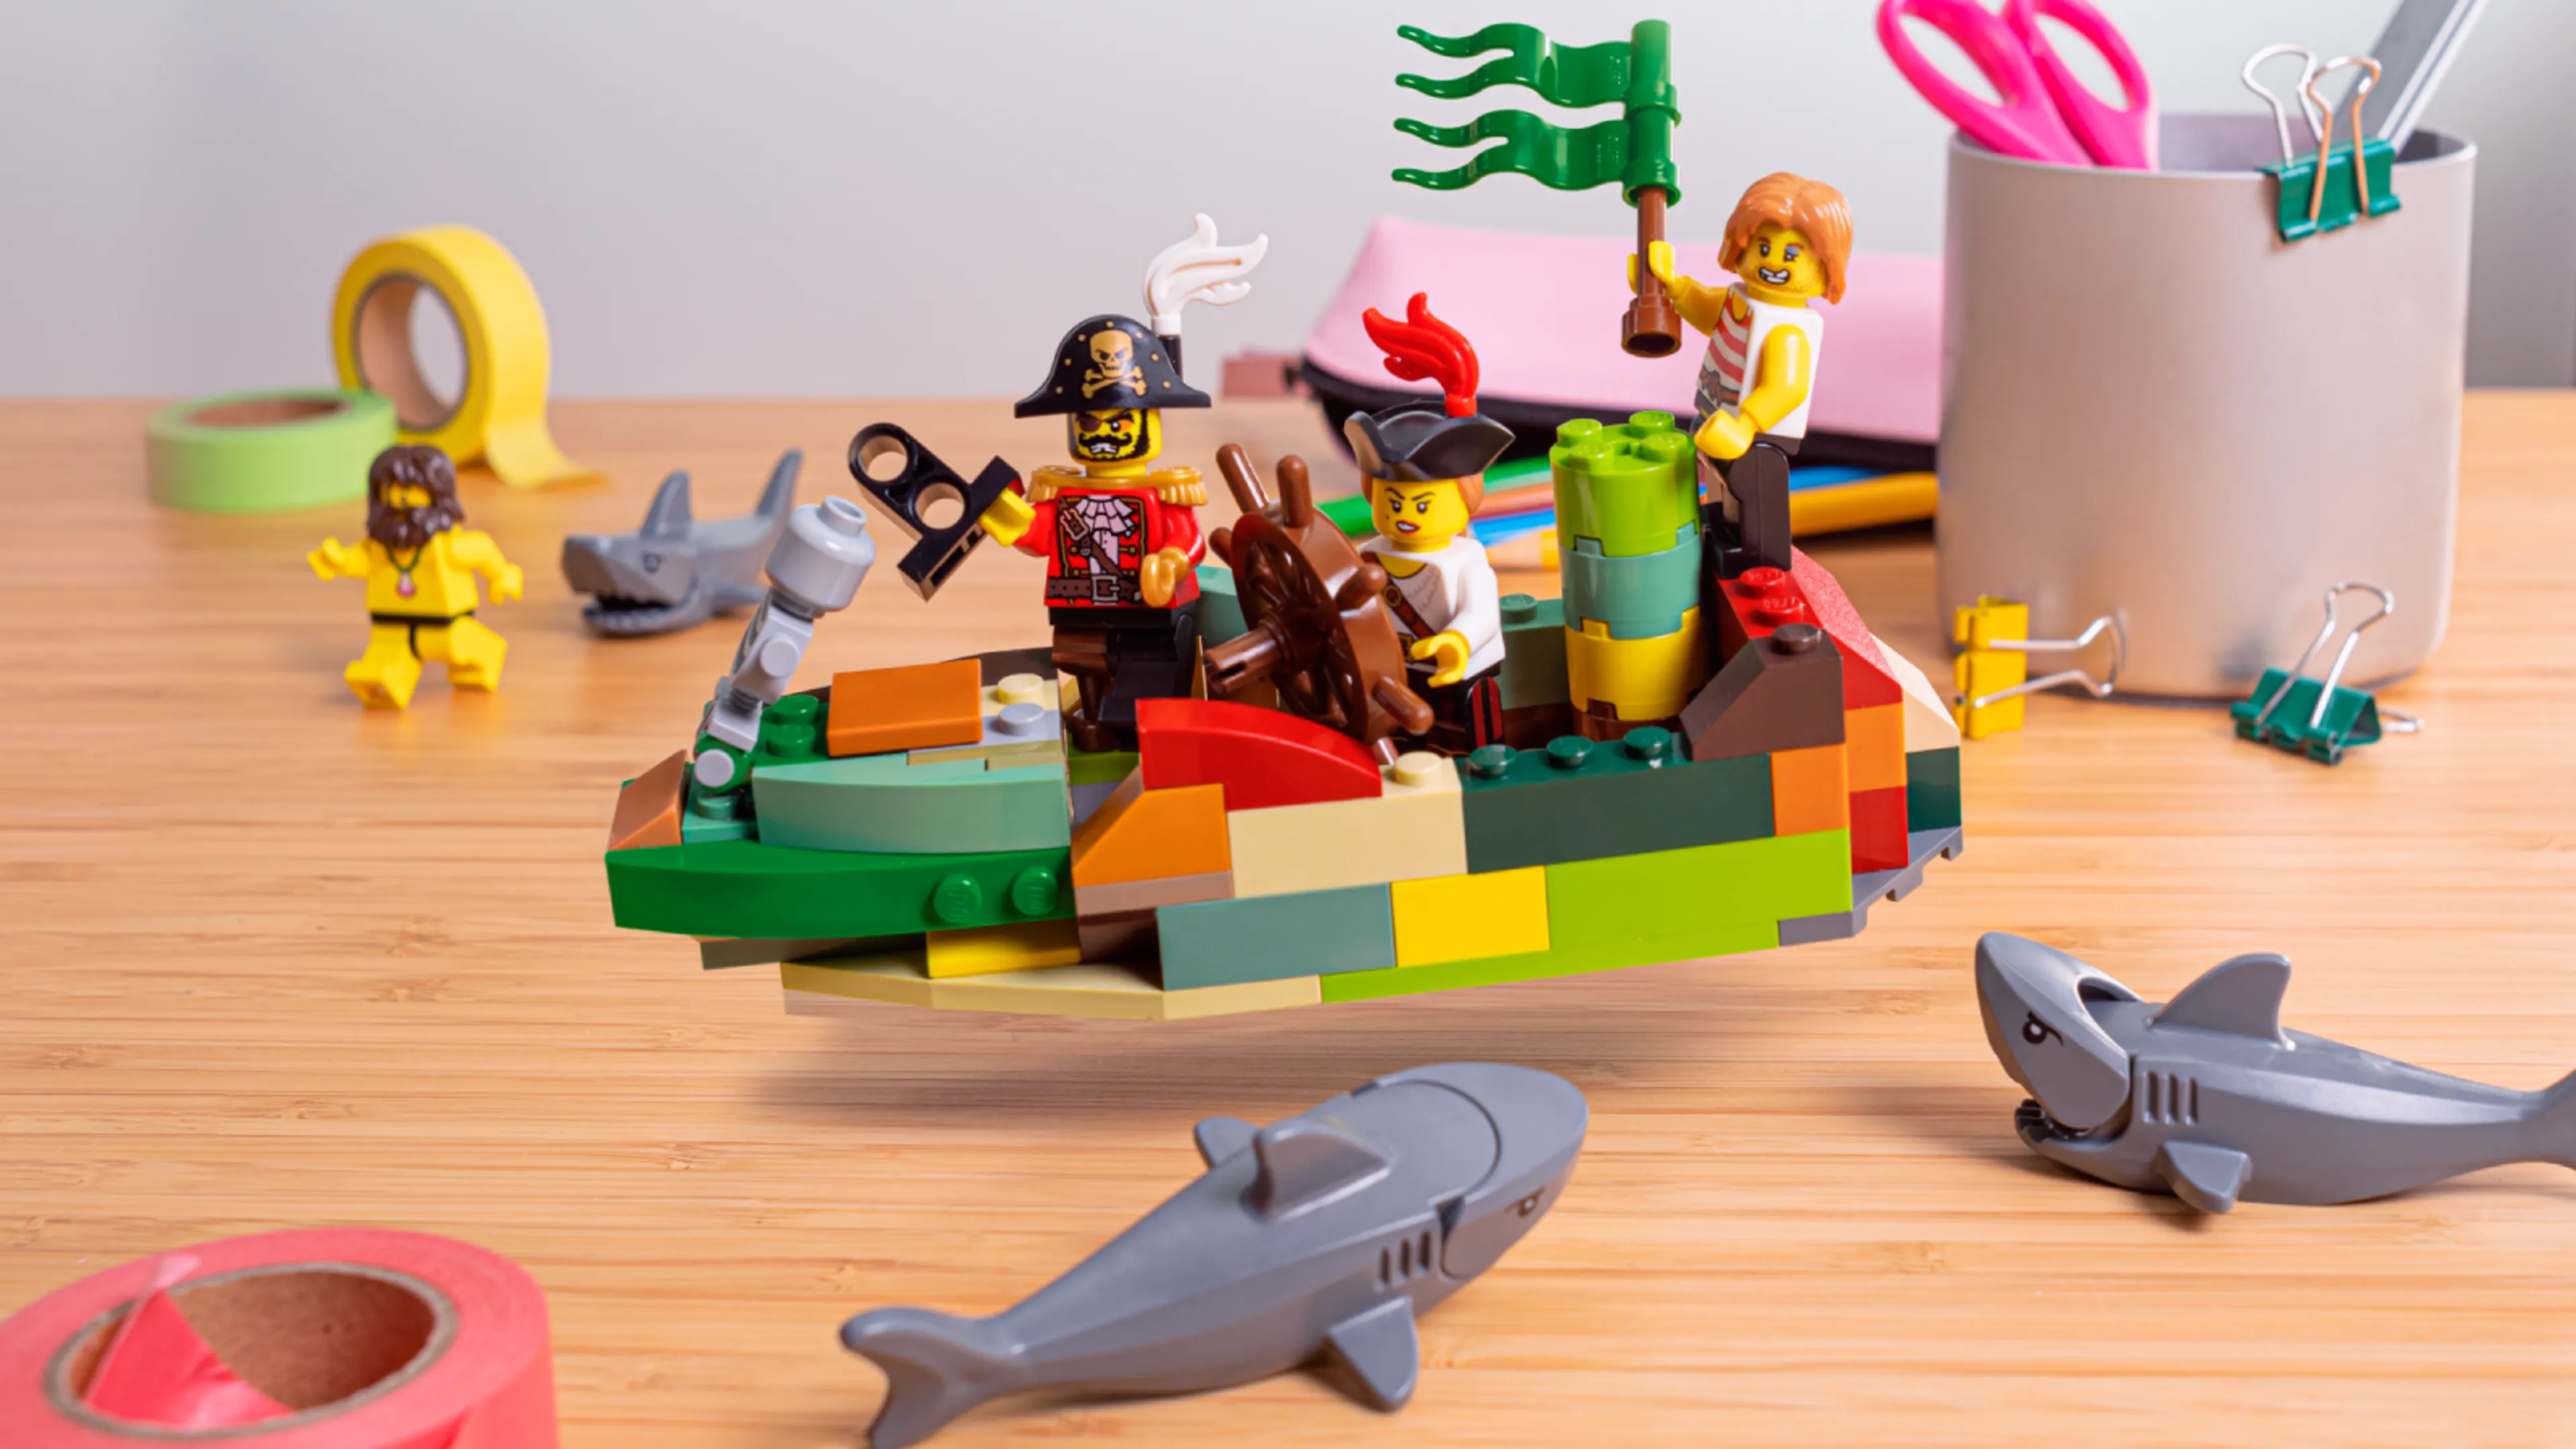 Minifigures finishing up the ship, surrounded by sharks